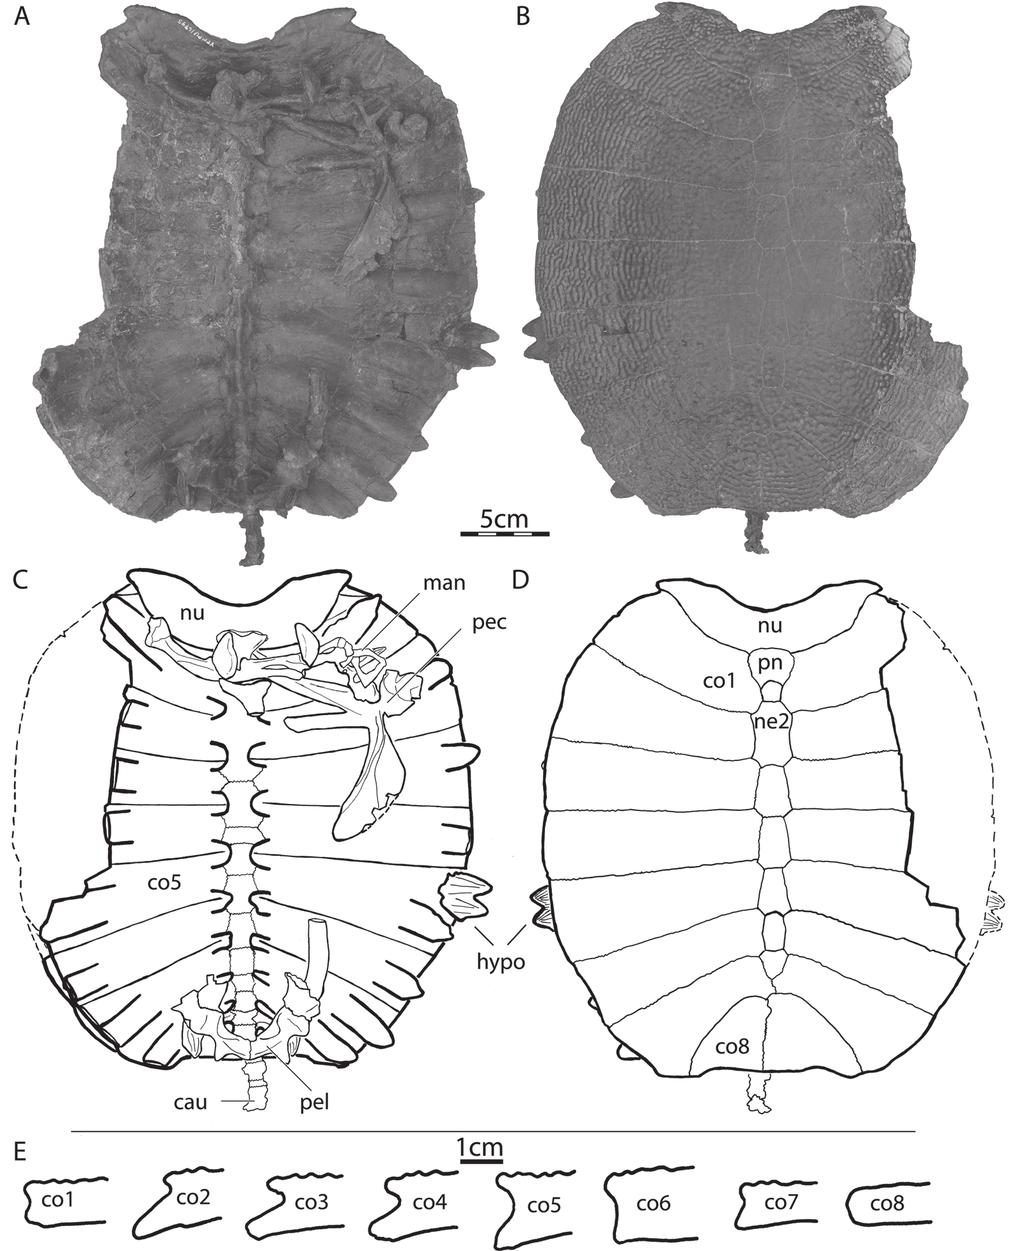 Two New Plastomenine Softshell Turtles Joyce et al. 311 Figure 2. YPM PU 16795, holotype of Hutchemys rememdium sp. nov. A. Ventral view of carapace. B. Dorsal view of carapace. C.